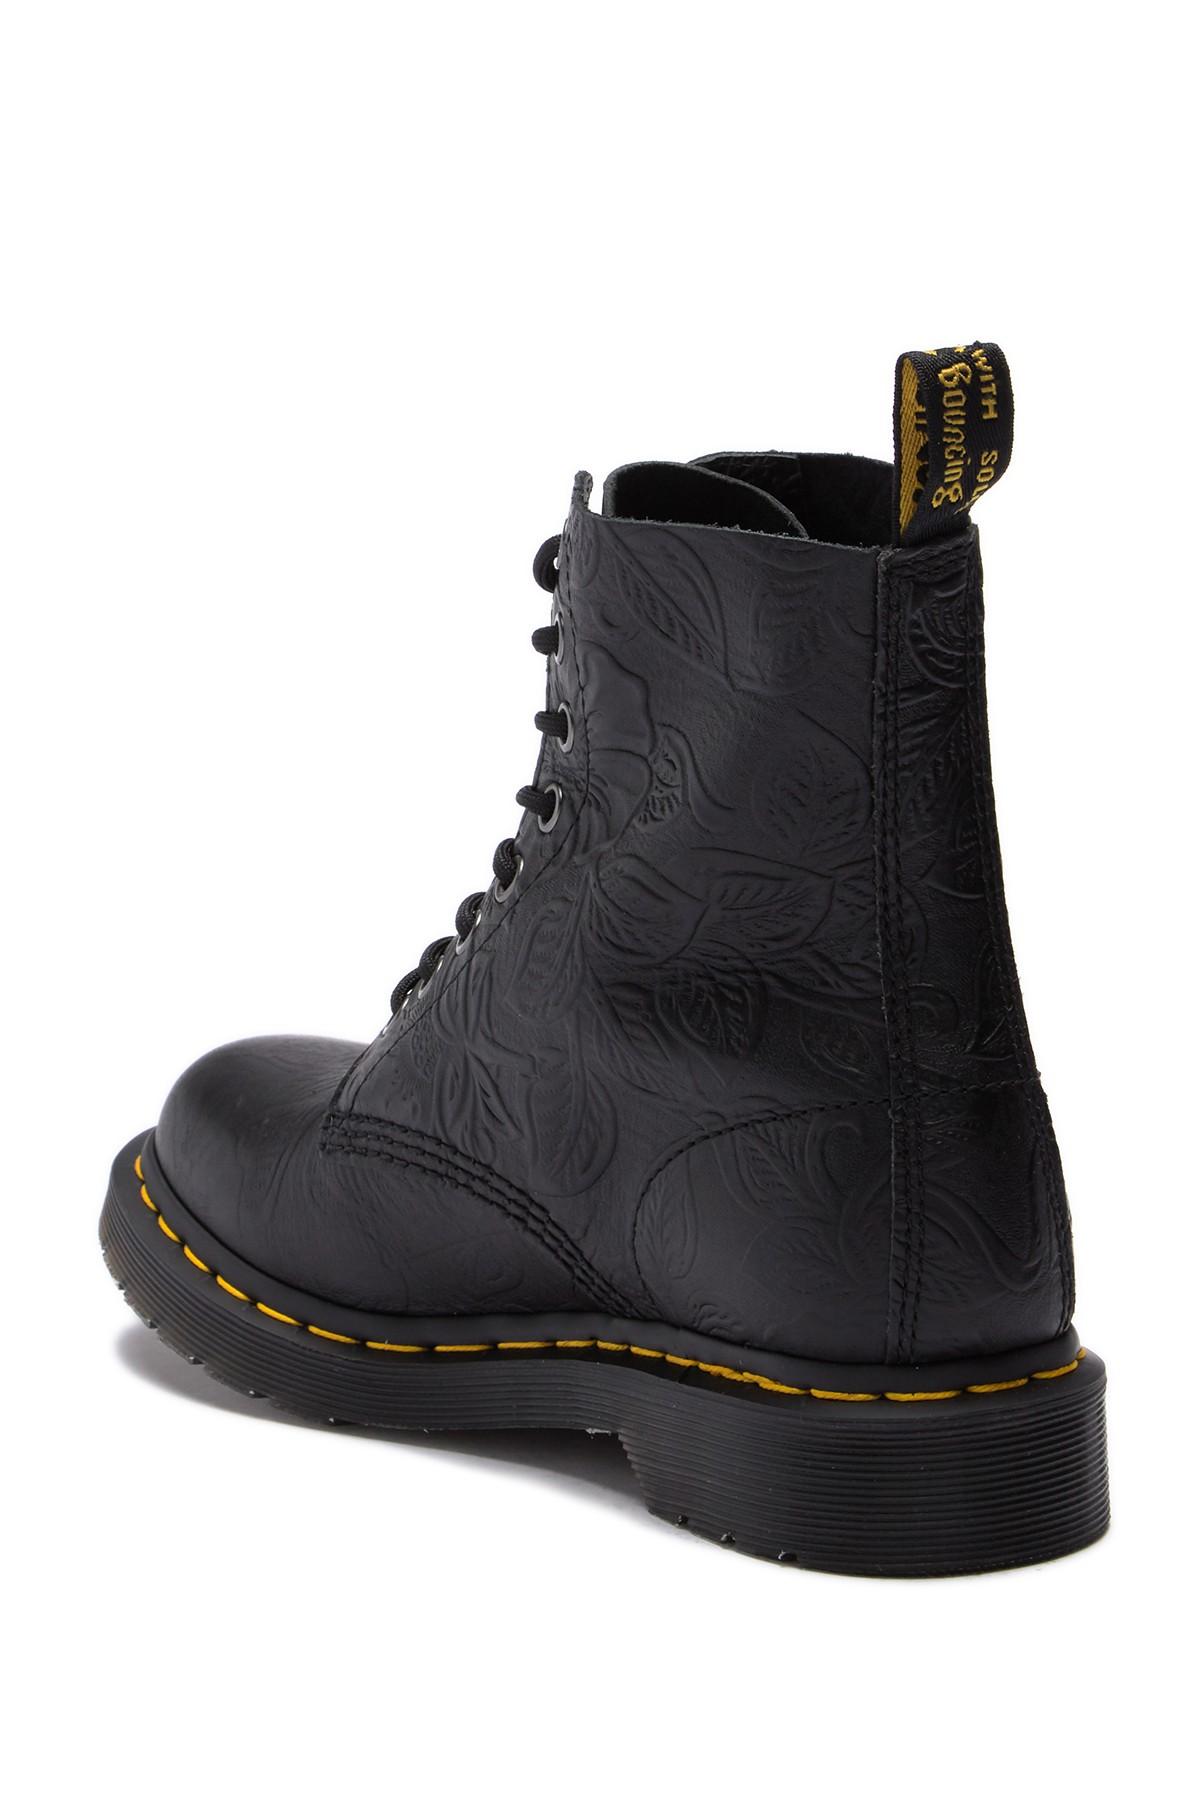 Dr. Martens 1460 Pascal Floral Emboss Mid Boots in Black Floral Embossed  Leather (Black) - Lyst